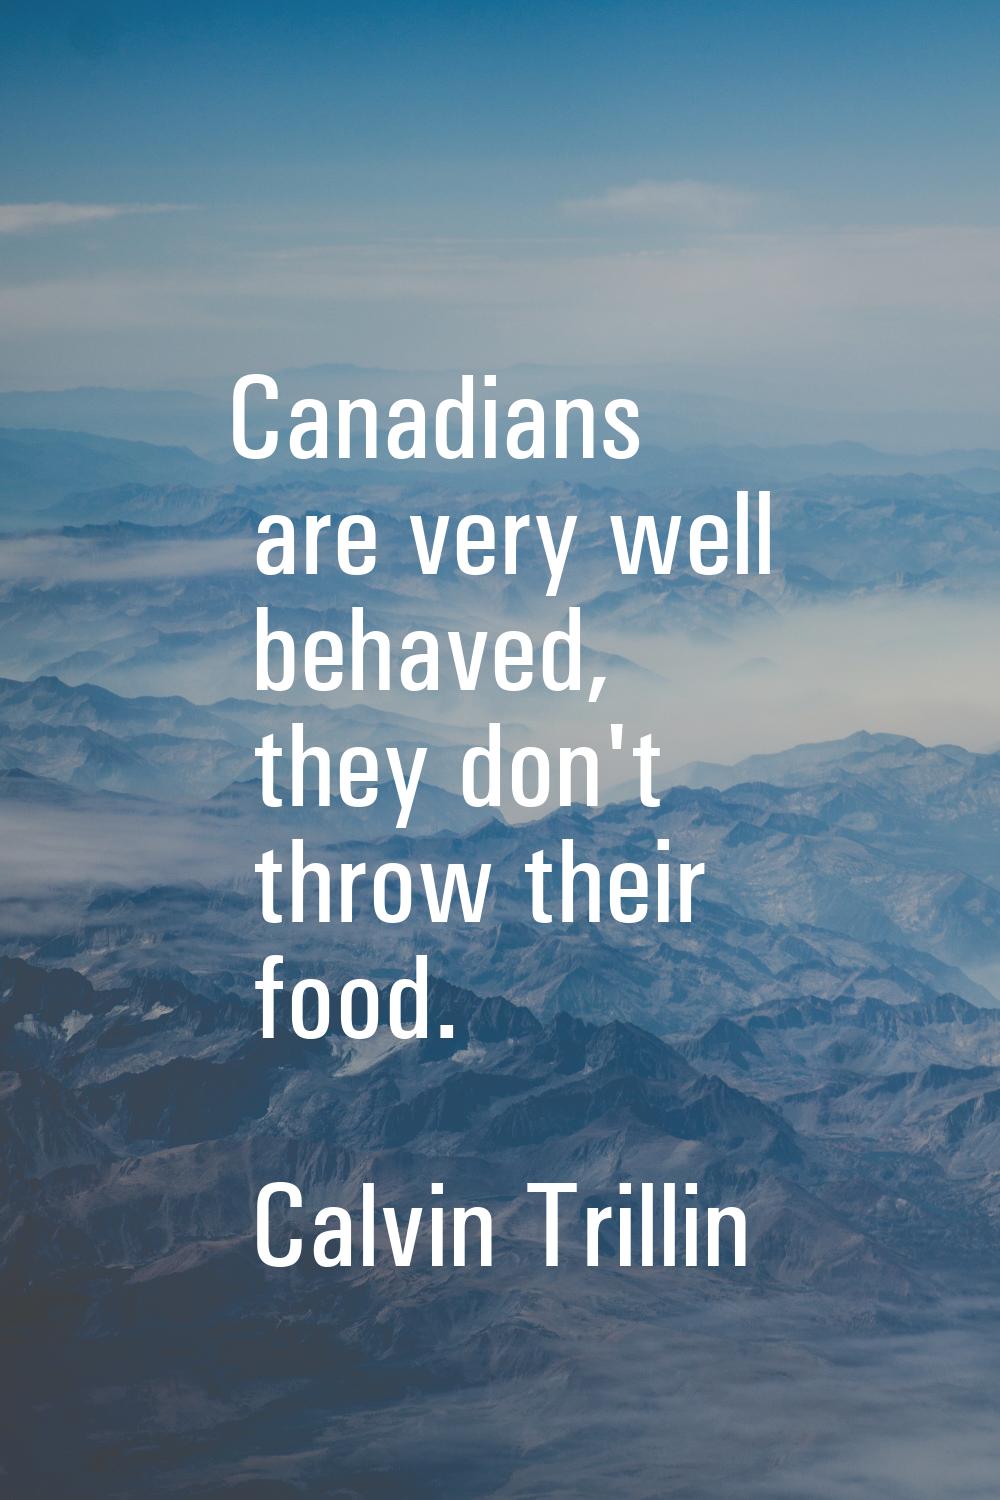 Canadians are very well behaved, they don't throw their food.